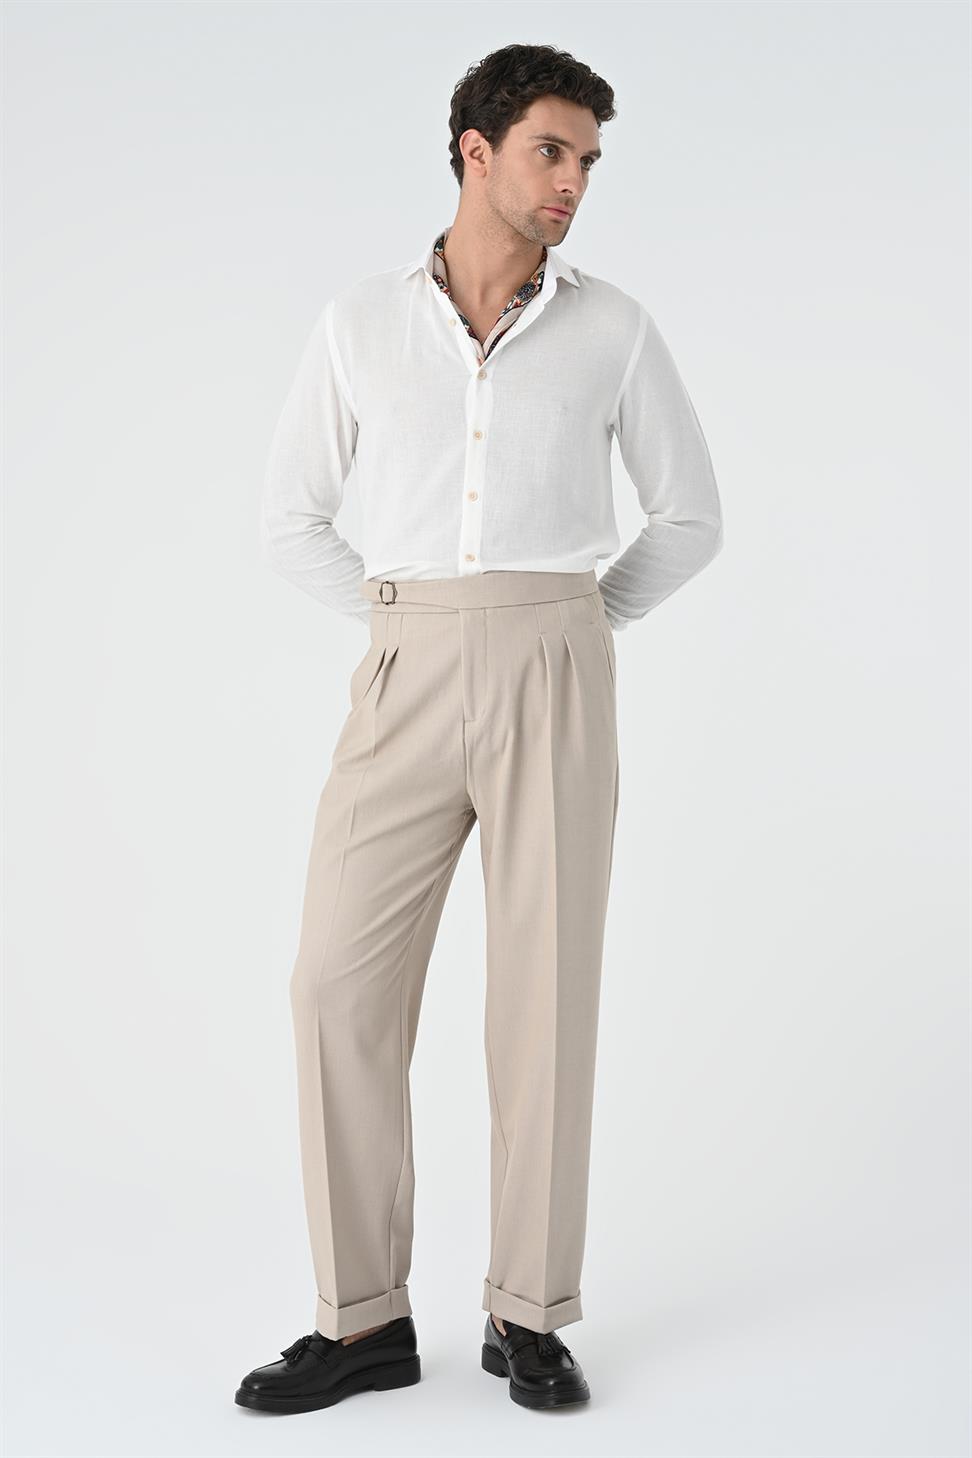 Buckle Detailed Pleated High Waist Men's Trousers